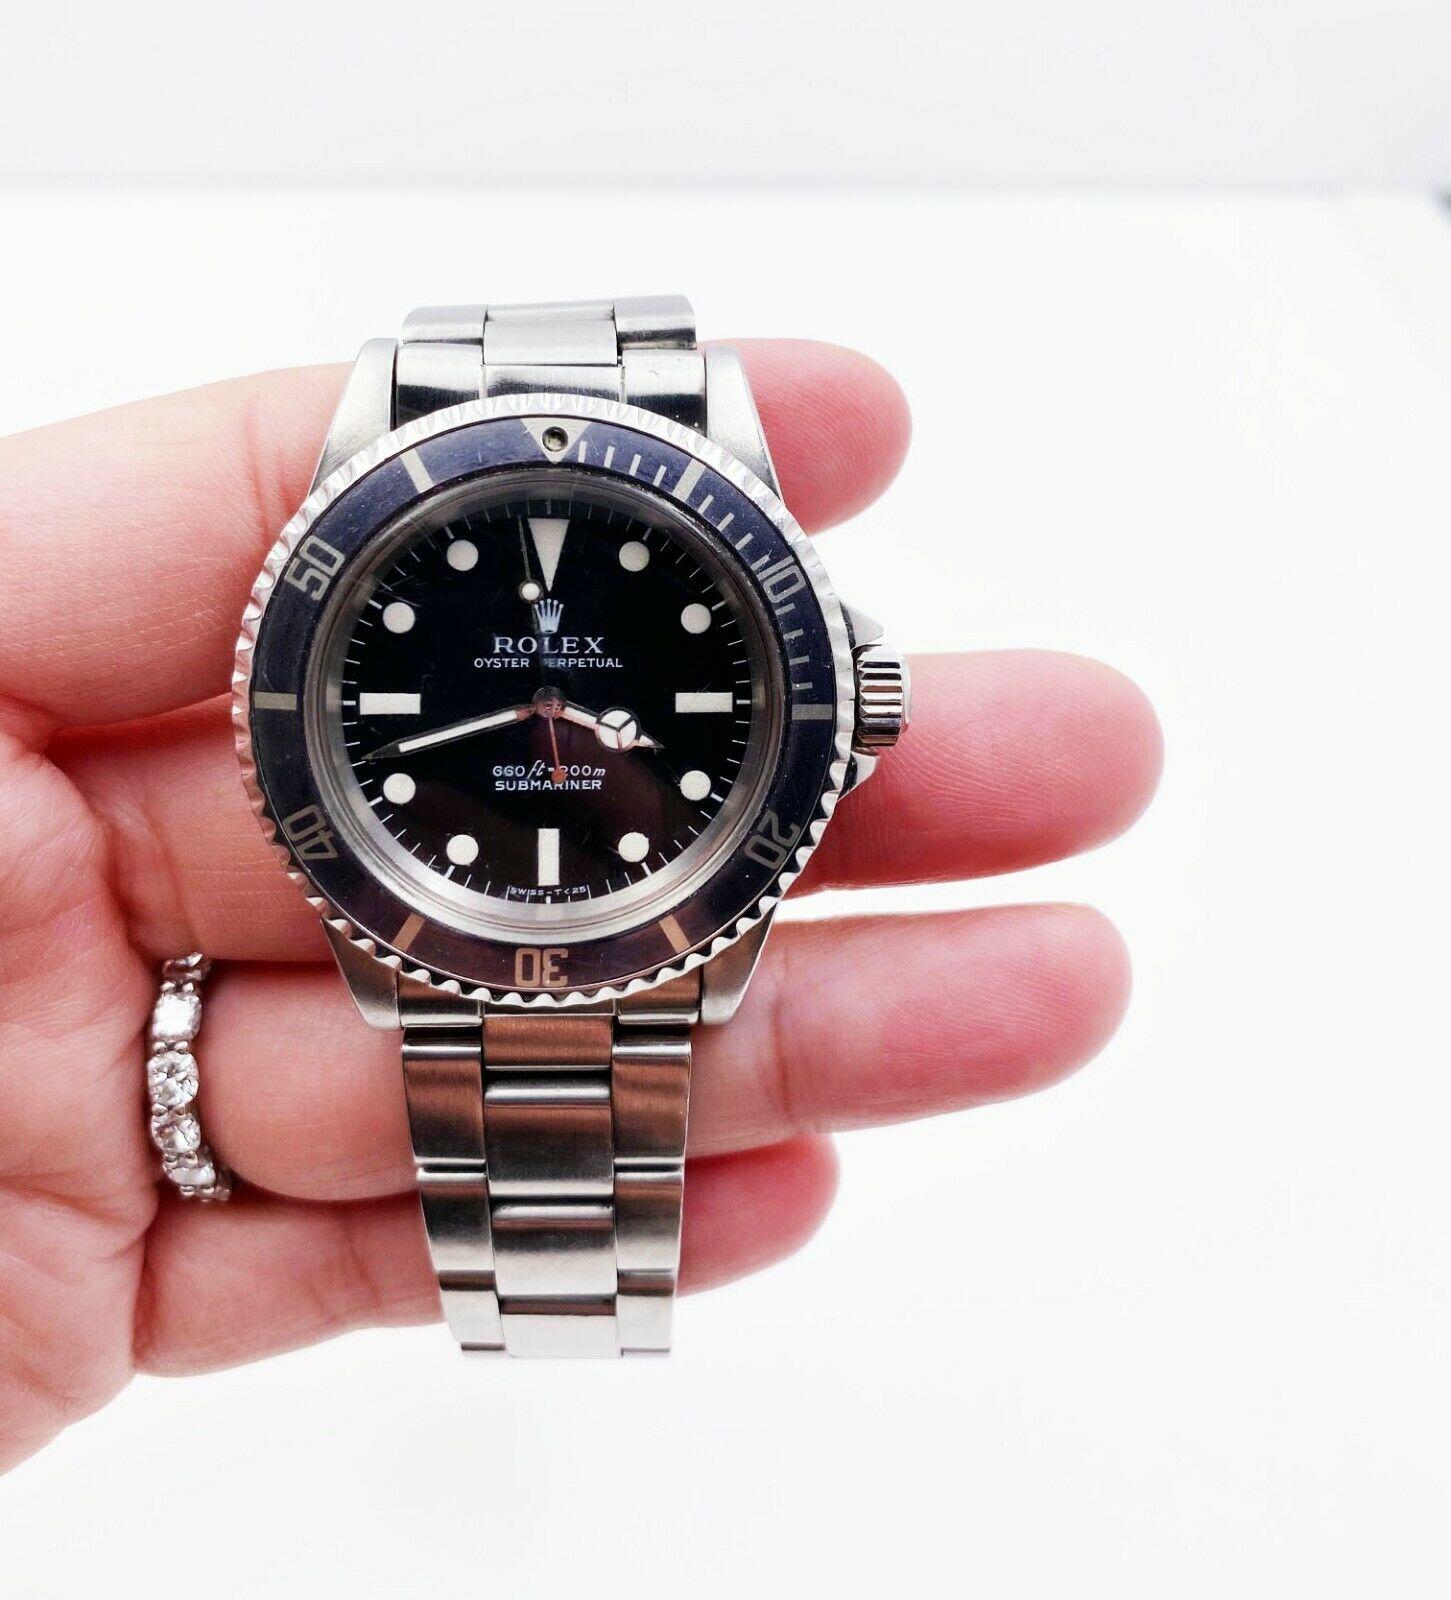 Style Number: 5513

 

Serial: 2597***



Year: 1969

 

Model: Submariner

 

Case Material: Stainless Steel

 

Band: Stainless Steel

 

Bezel:  Black

 

Dial: Black

 

Face: Acrylic 

 

Case Size: 40mm

 

Includes: 

-Rolex Service Pouch &